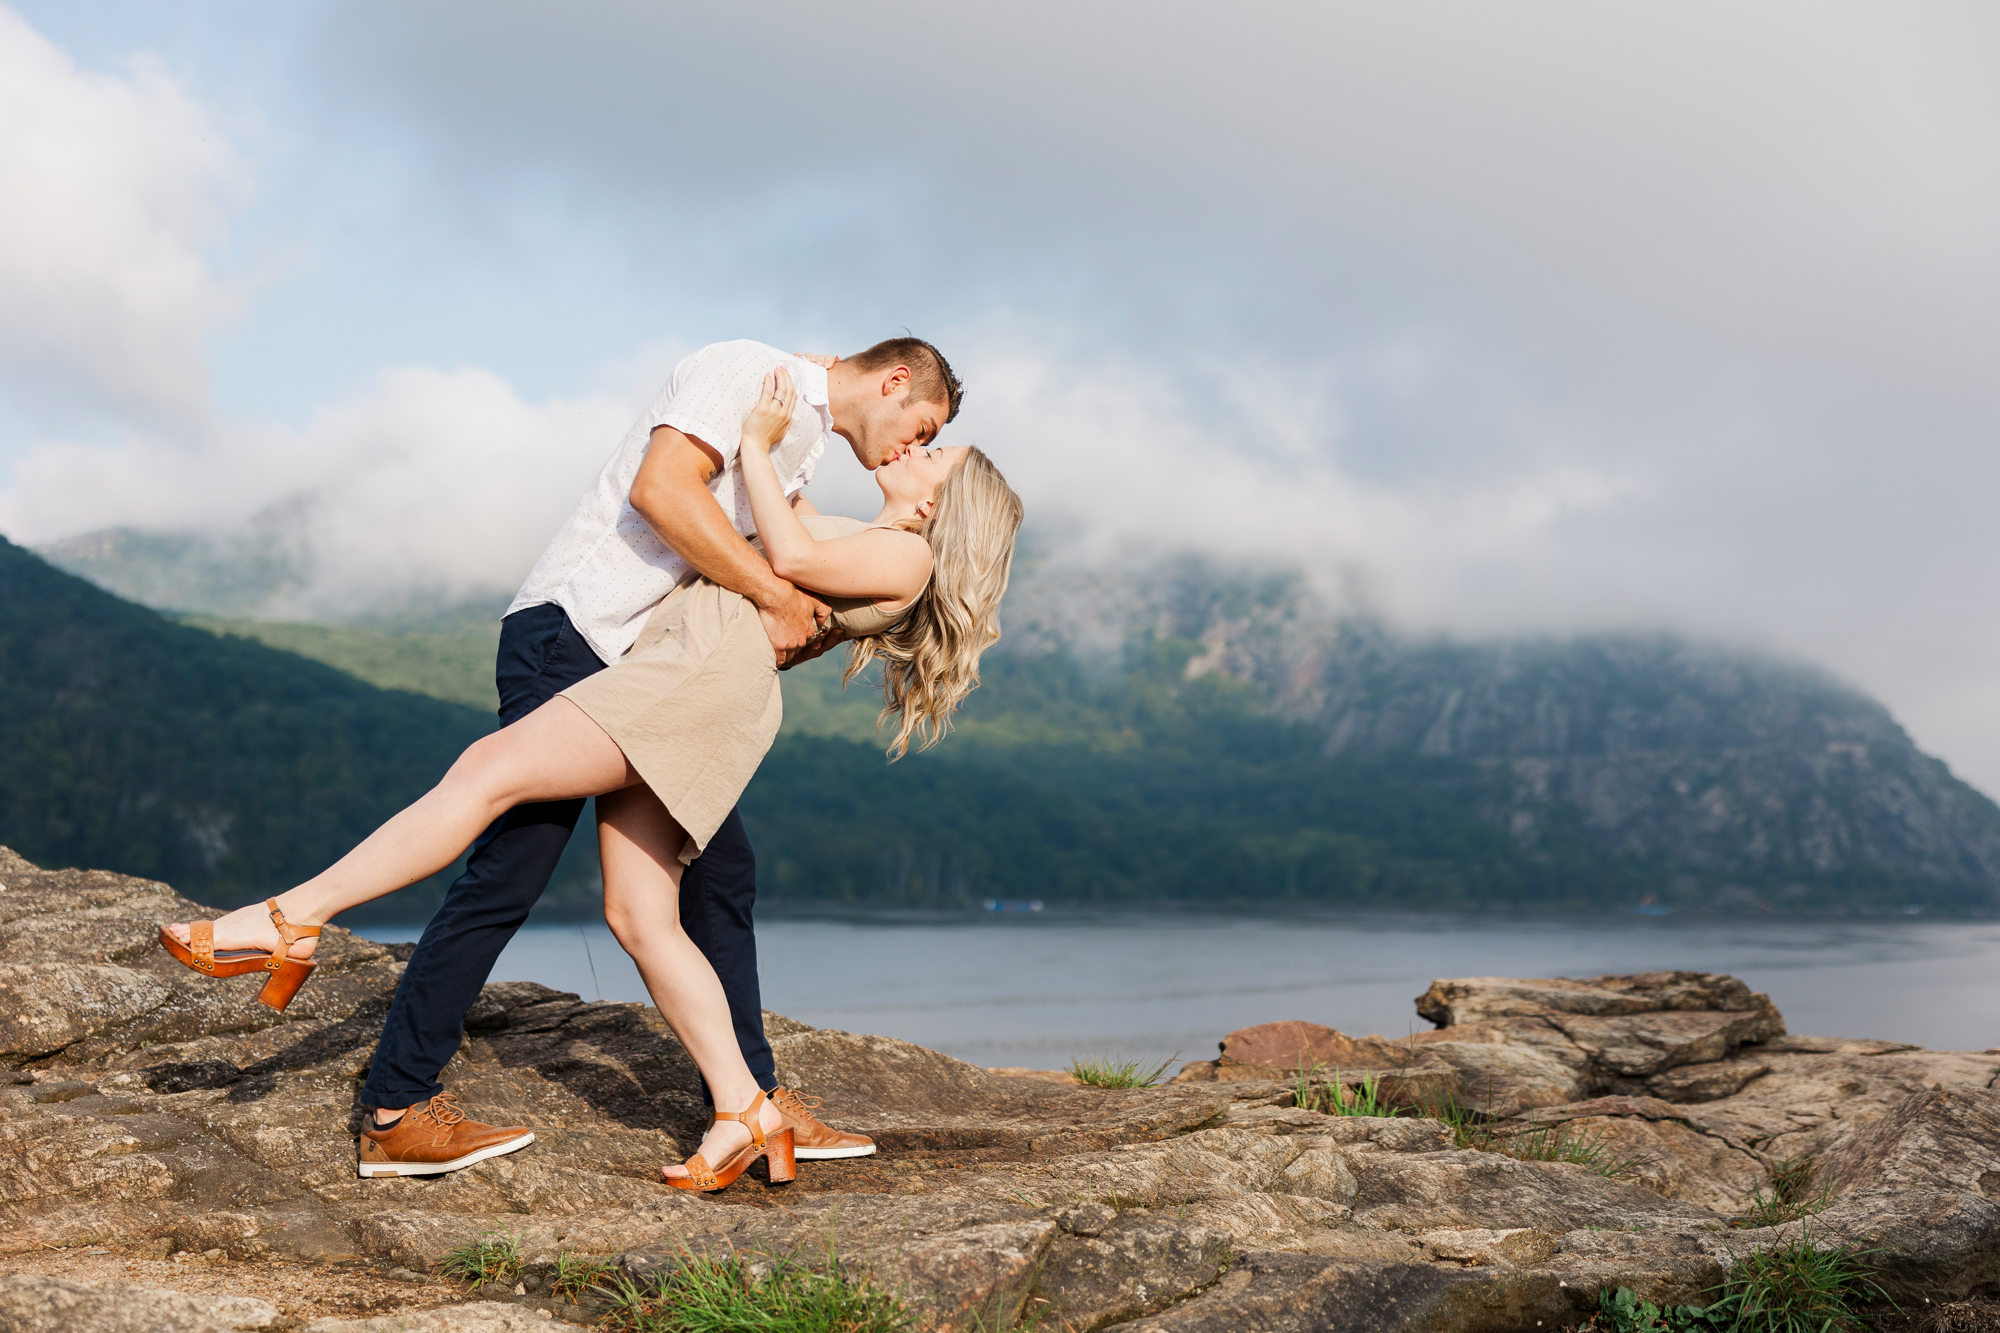 Fun-Filled Little Stony Point Engagement Photos